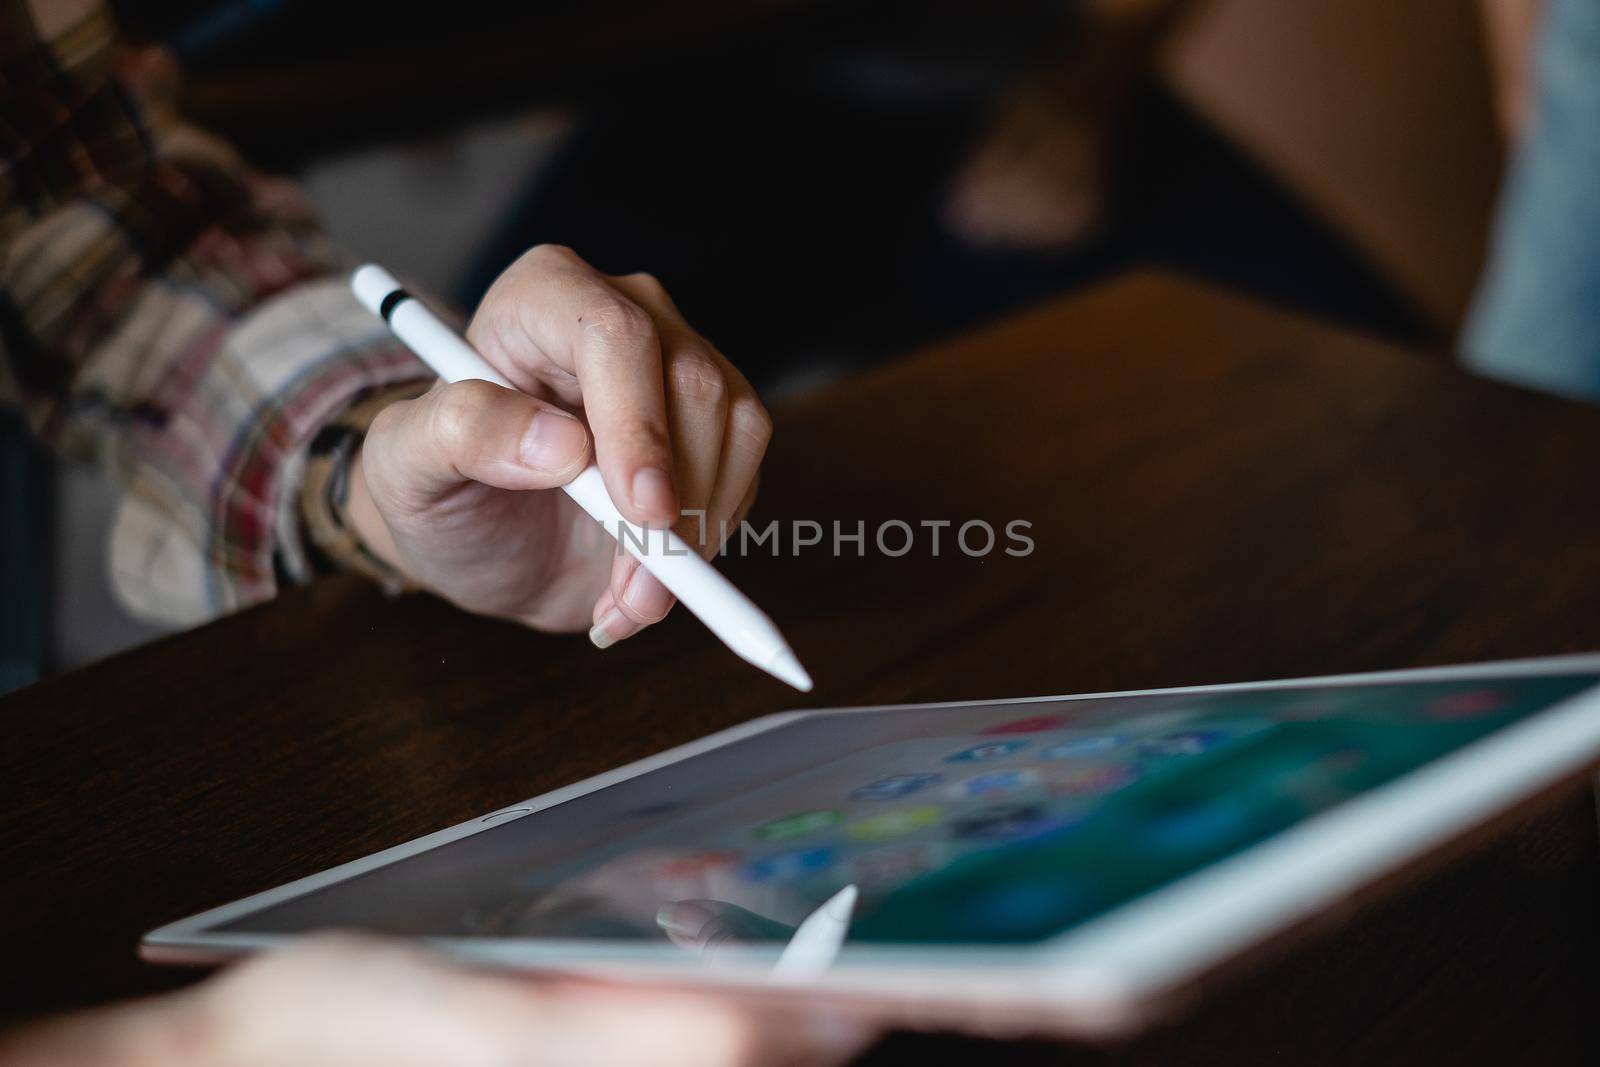 CHIANG MAI, THAILAND - FEB 26, 2020 : Hand of woman using Ipad and pencil with icons of social media on screen, smartphone life style, smartphone era, smartphone in everyday life